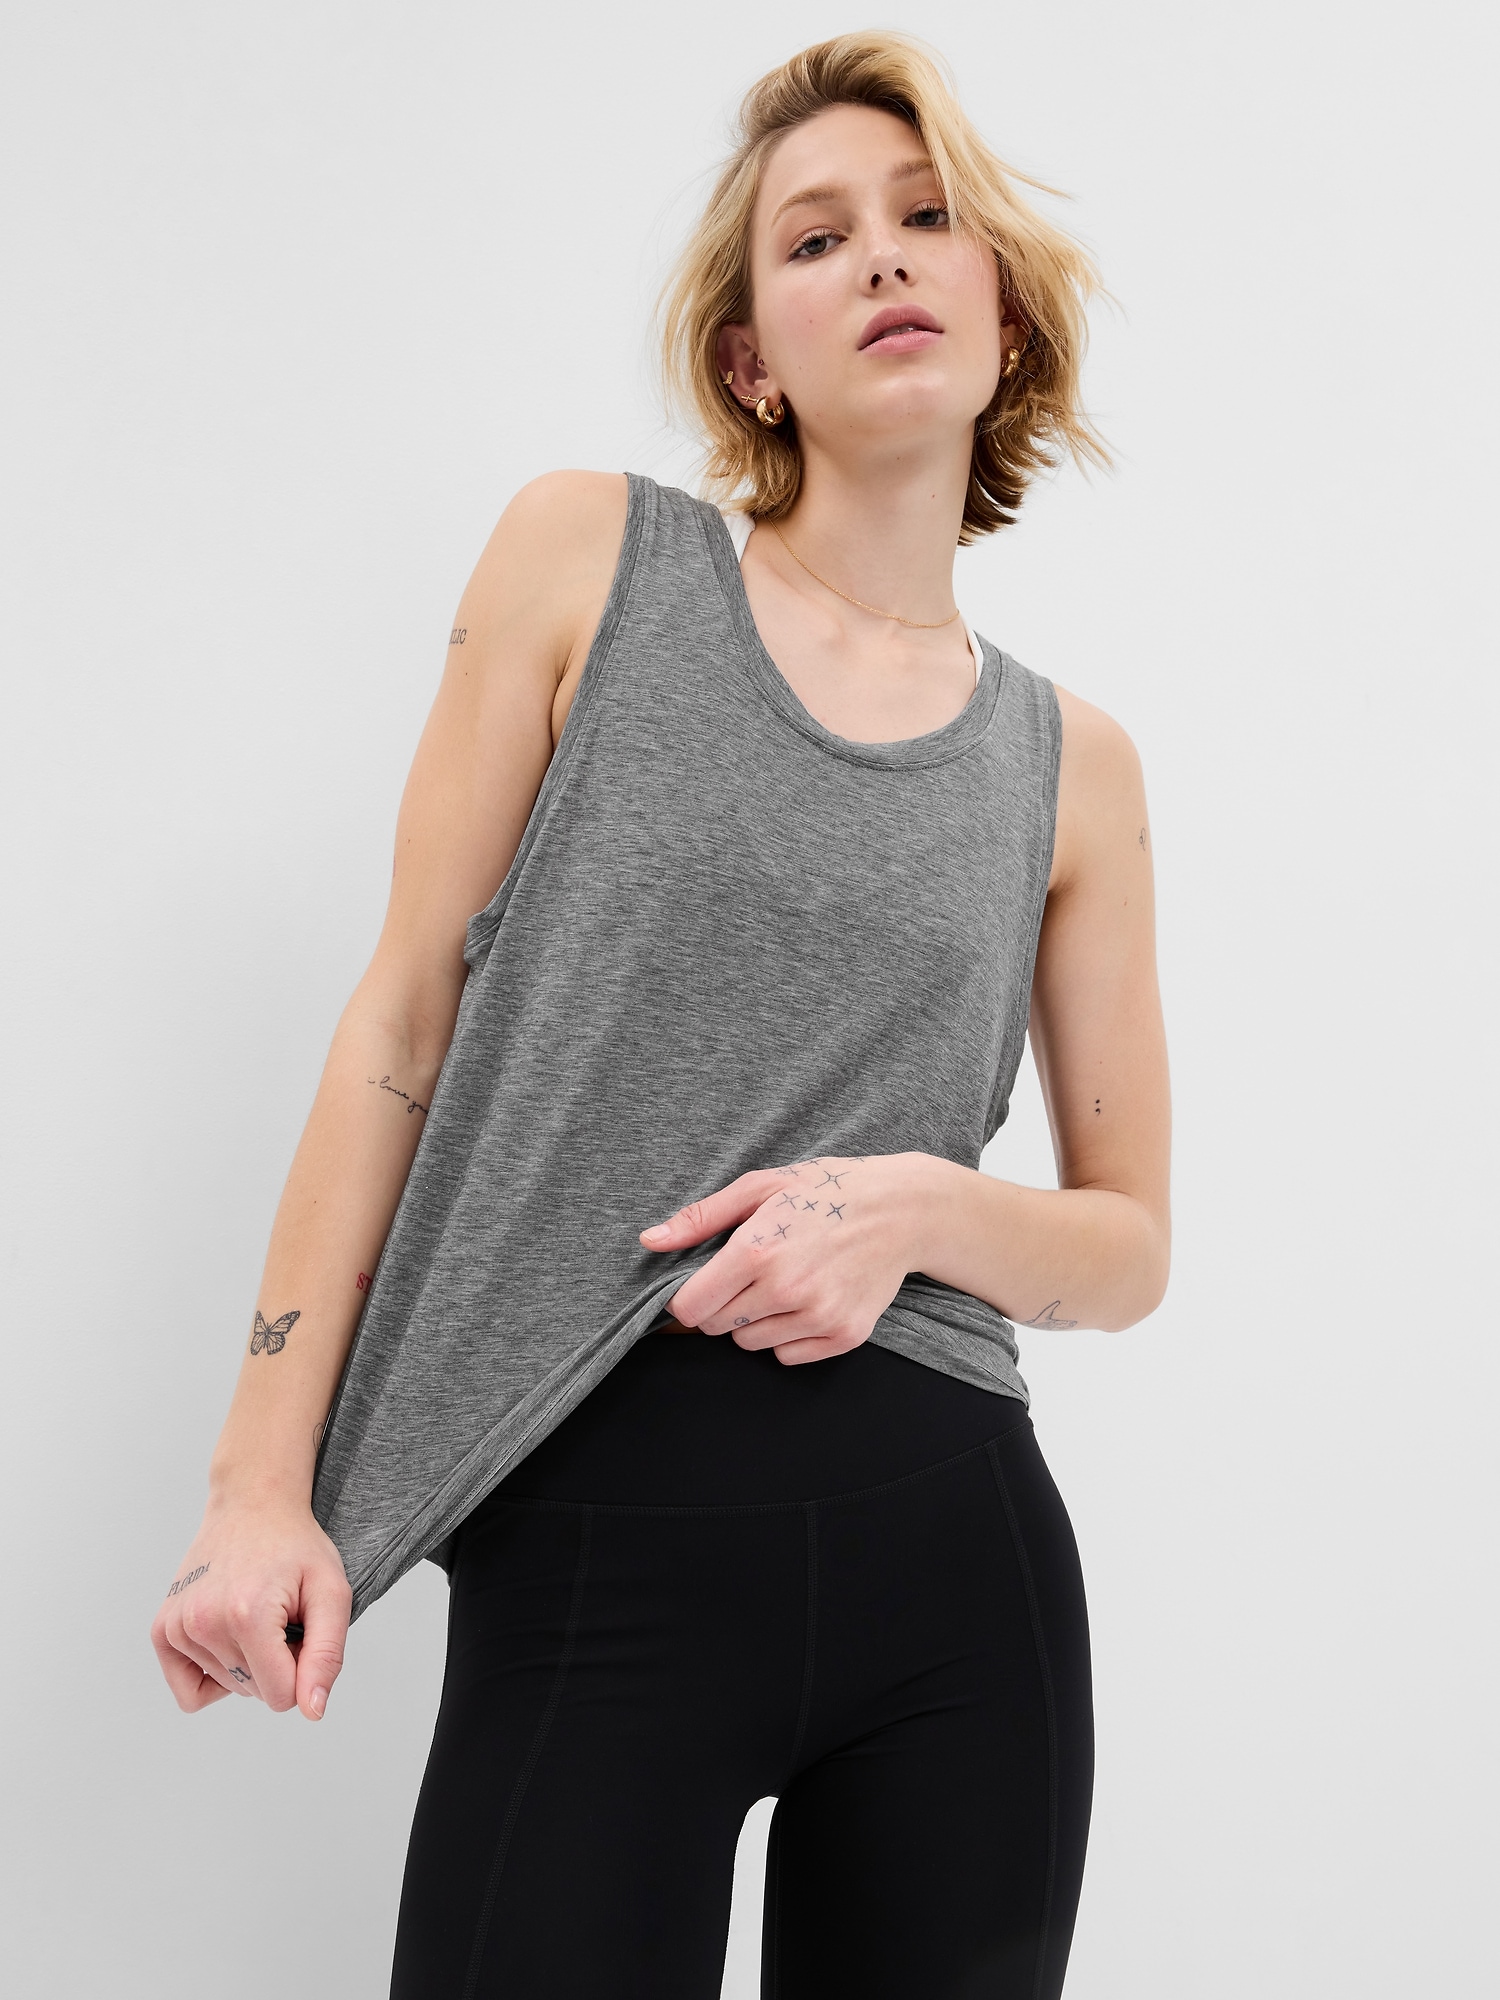 Breathable Ribbed Yoga Sport Clothes For Women Sleeveless T Shirt